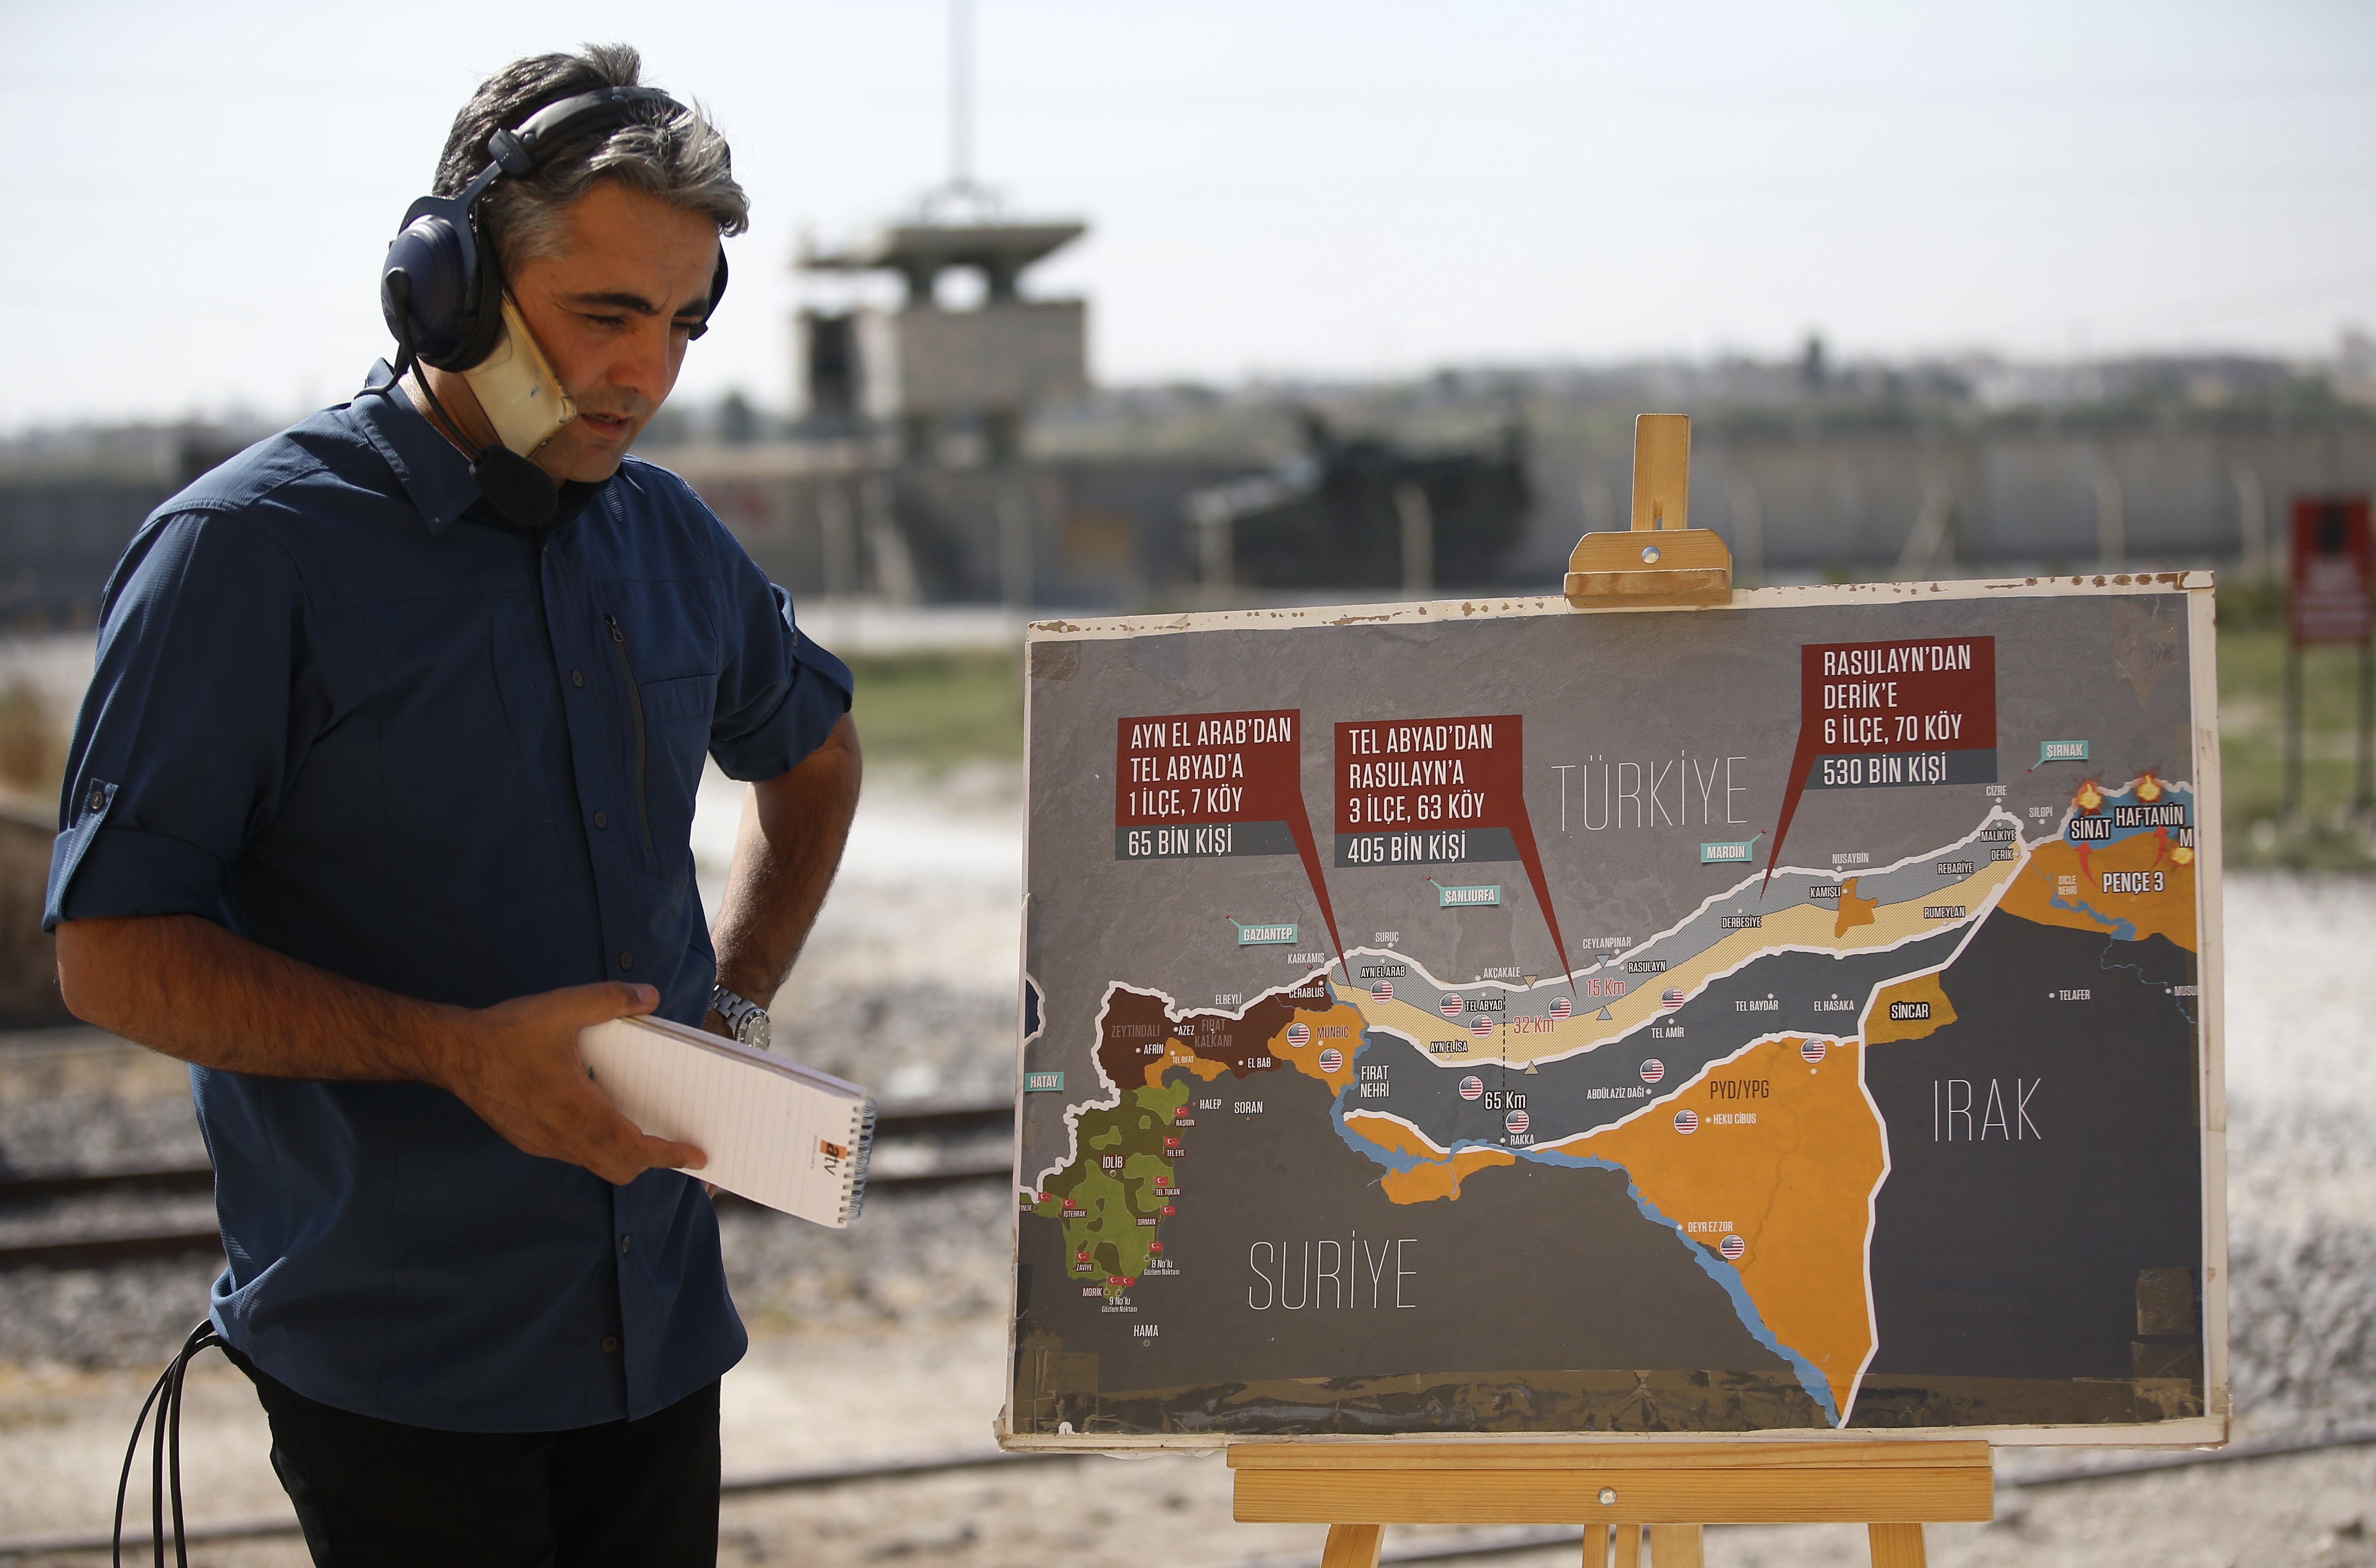 A TV journalist prepares to work in front of a map showing Turkey's suggested operation in Syria, at the border between Turkey and Syria, in Akcakale, Sanliurfa province, southeastern Turkey, Tuesday, Oct. 8, 2019. Turkey's vice president Fuat Oktay says his country won't bow to threats in an apparent response to U.S. President Donald Trump's warning to Ankara about the scope of its planned military incursion into Syria. (AP Photo/Lefteris Pitarakis)